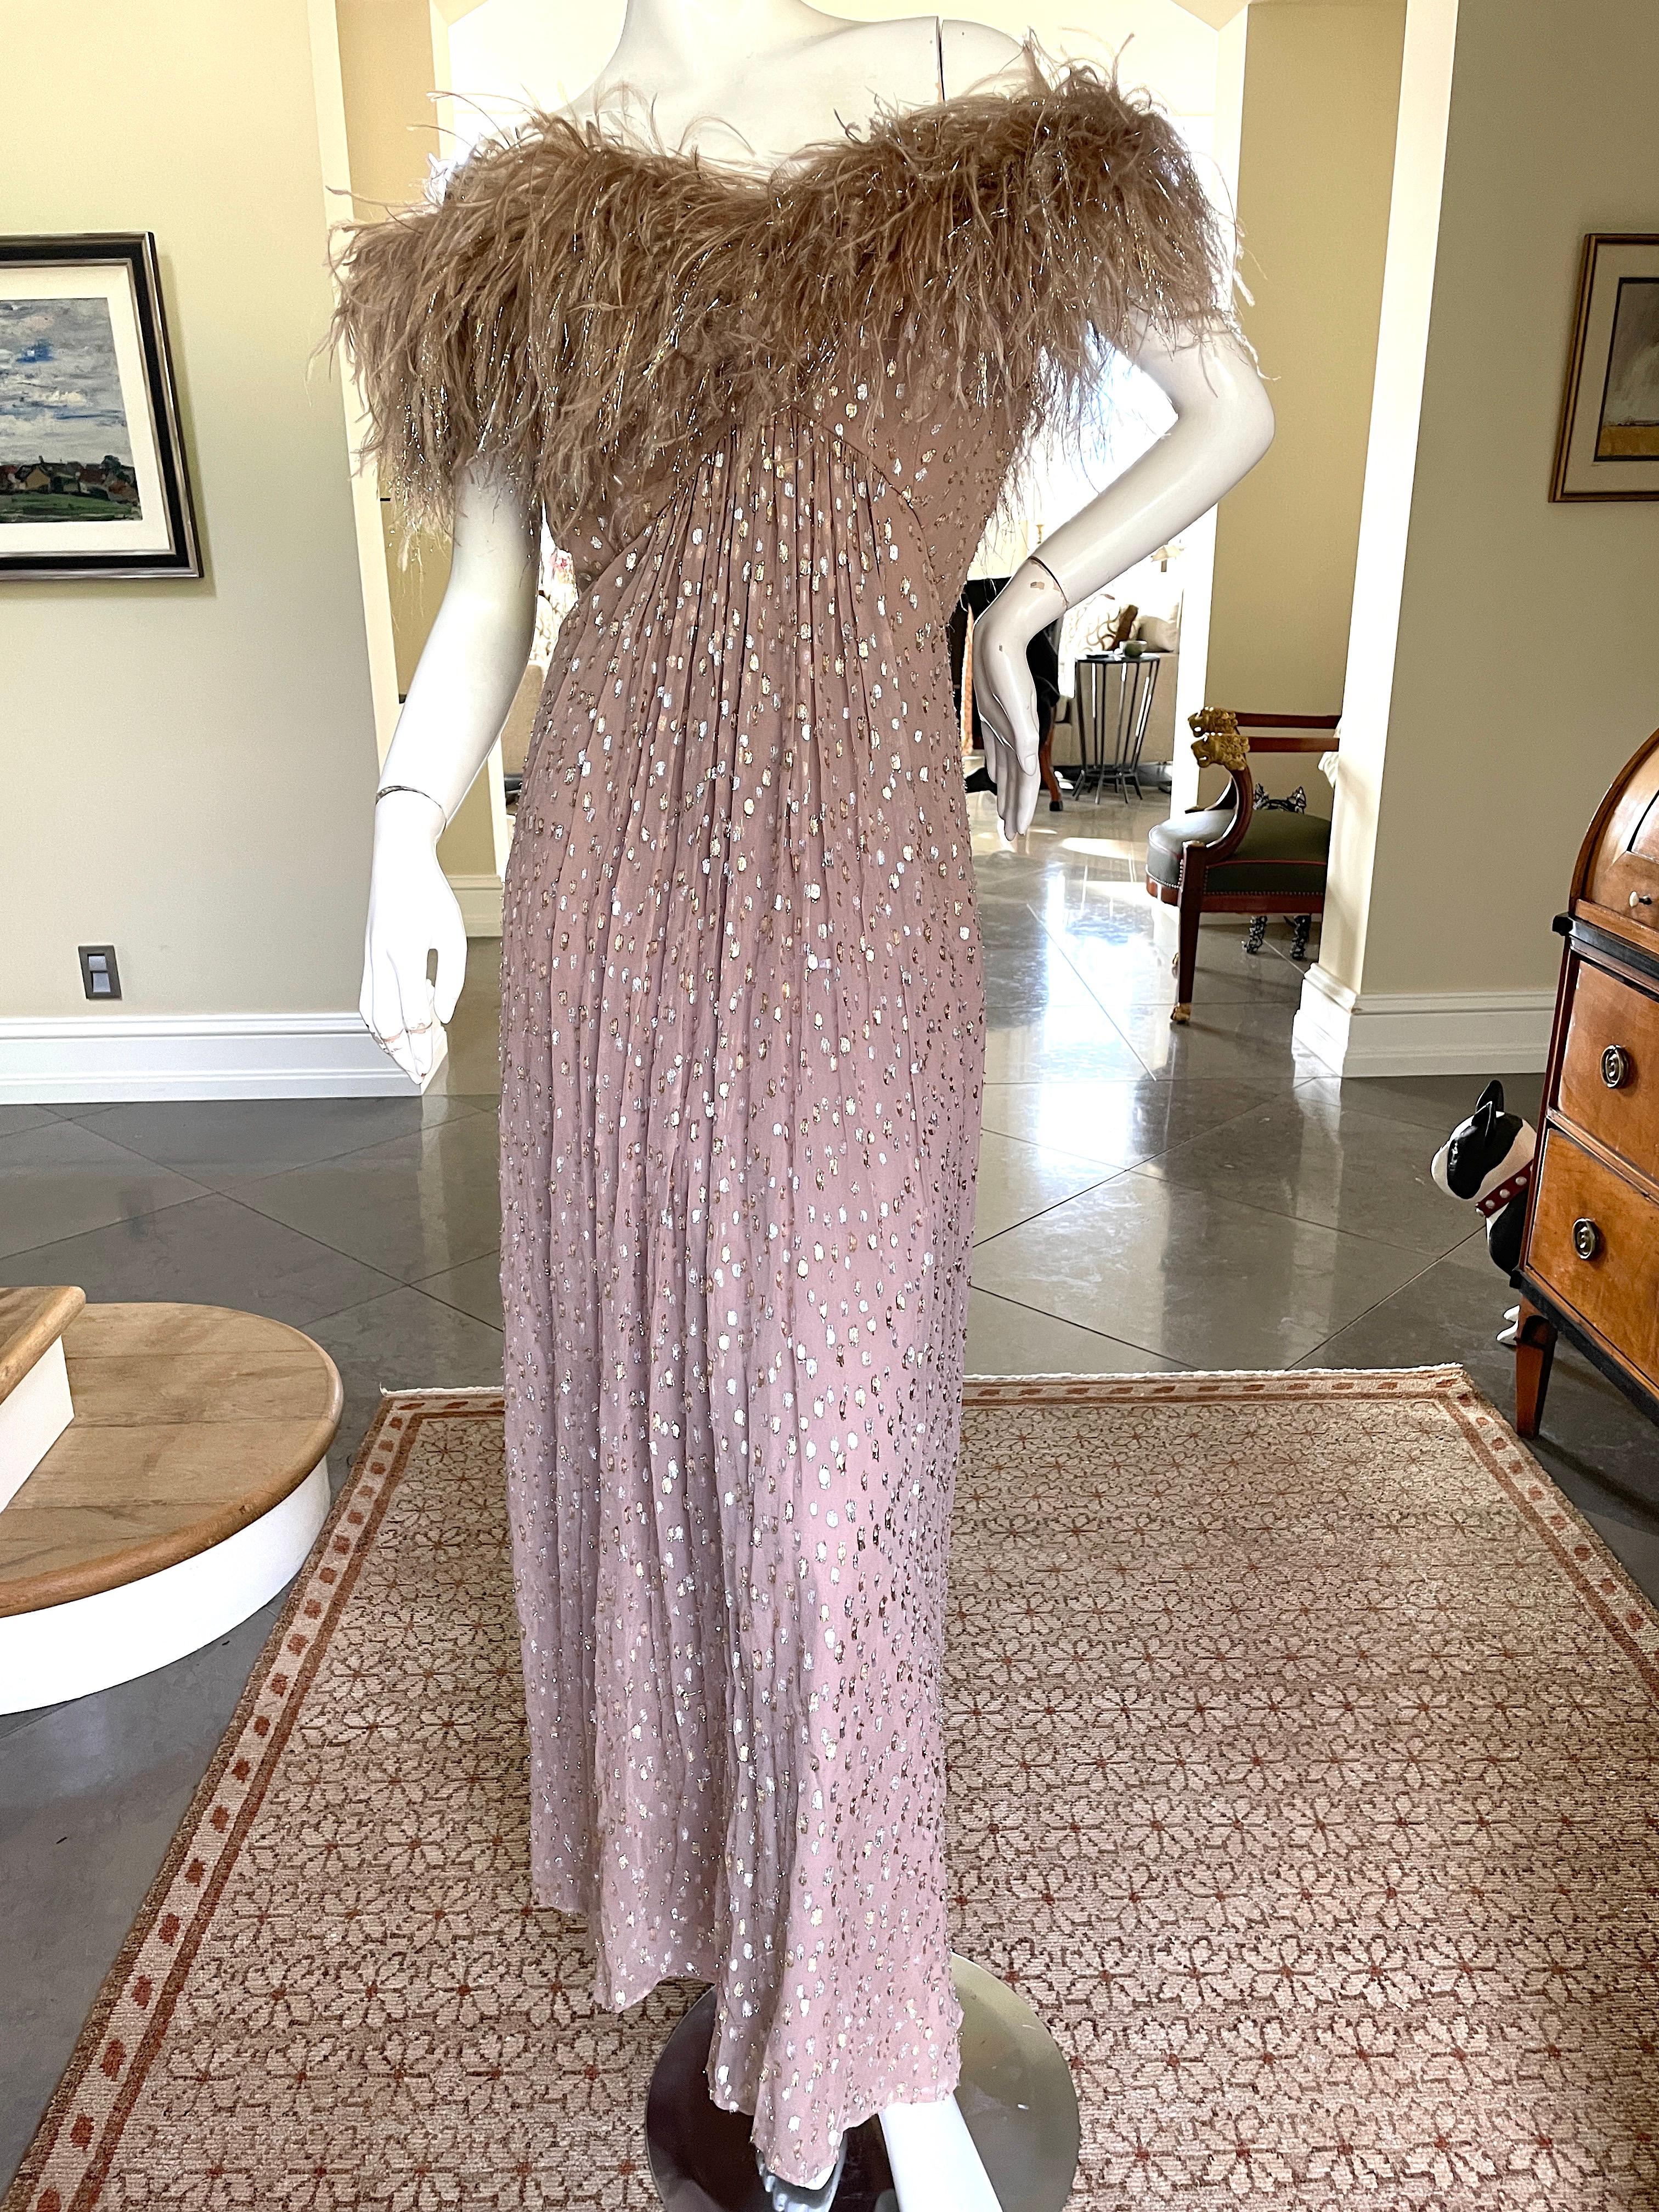 Victor Costa Vintage Devore Velvet Evening Dress with Off the Shoulder Feather Trim
This is sensational, a real entrance maker, the feather's have tinsel.
I'm not certain if the feathers are worn off the shoulder or as shoulder straps
Size 6, there